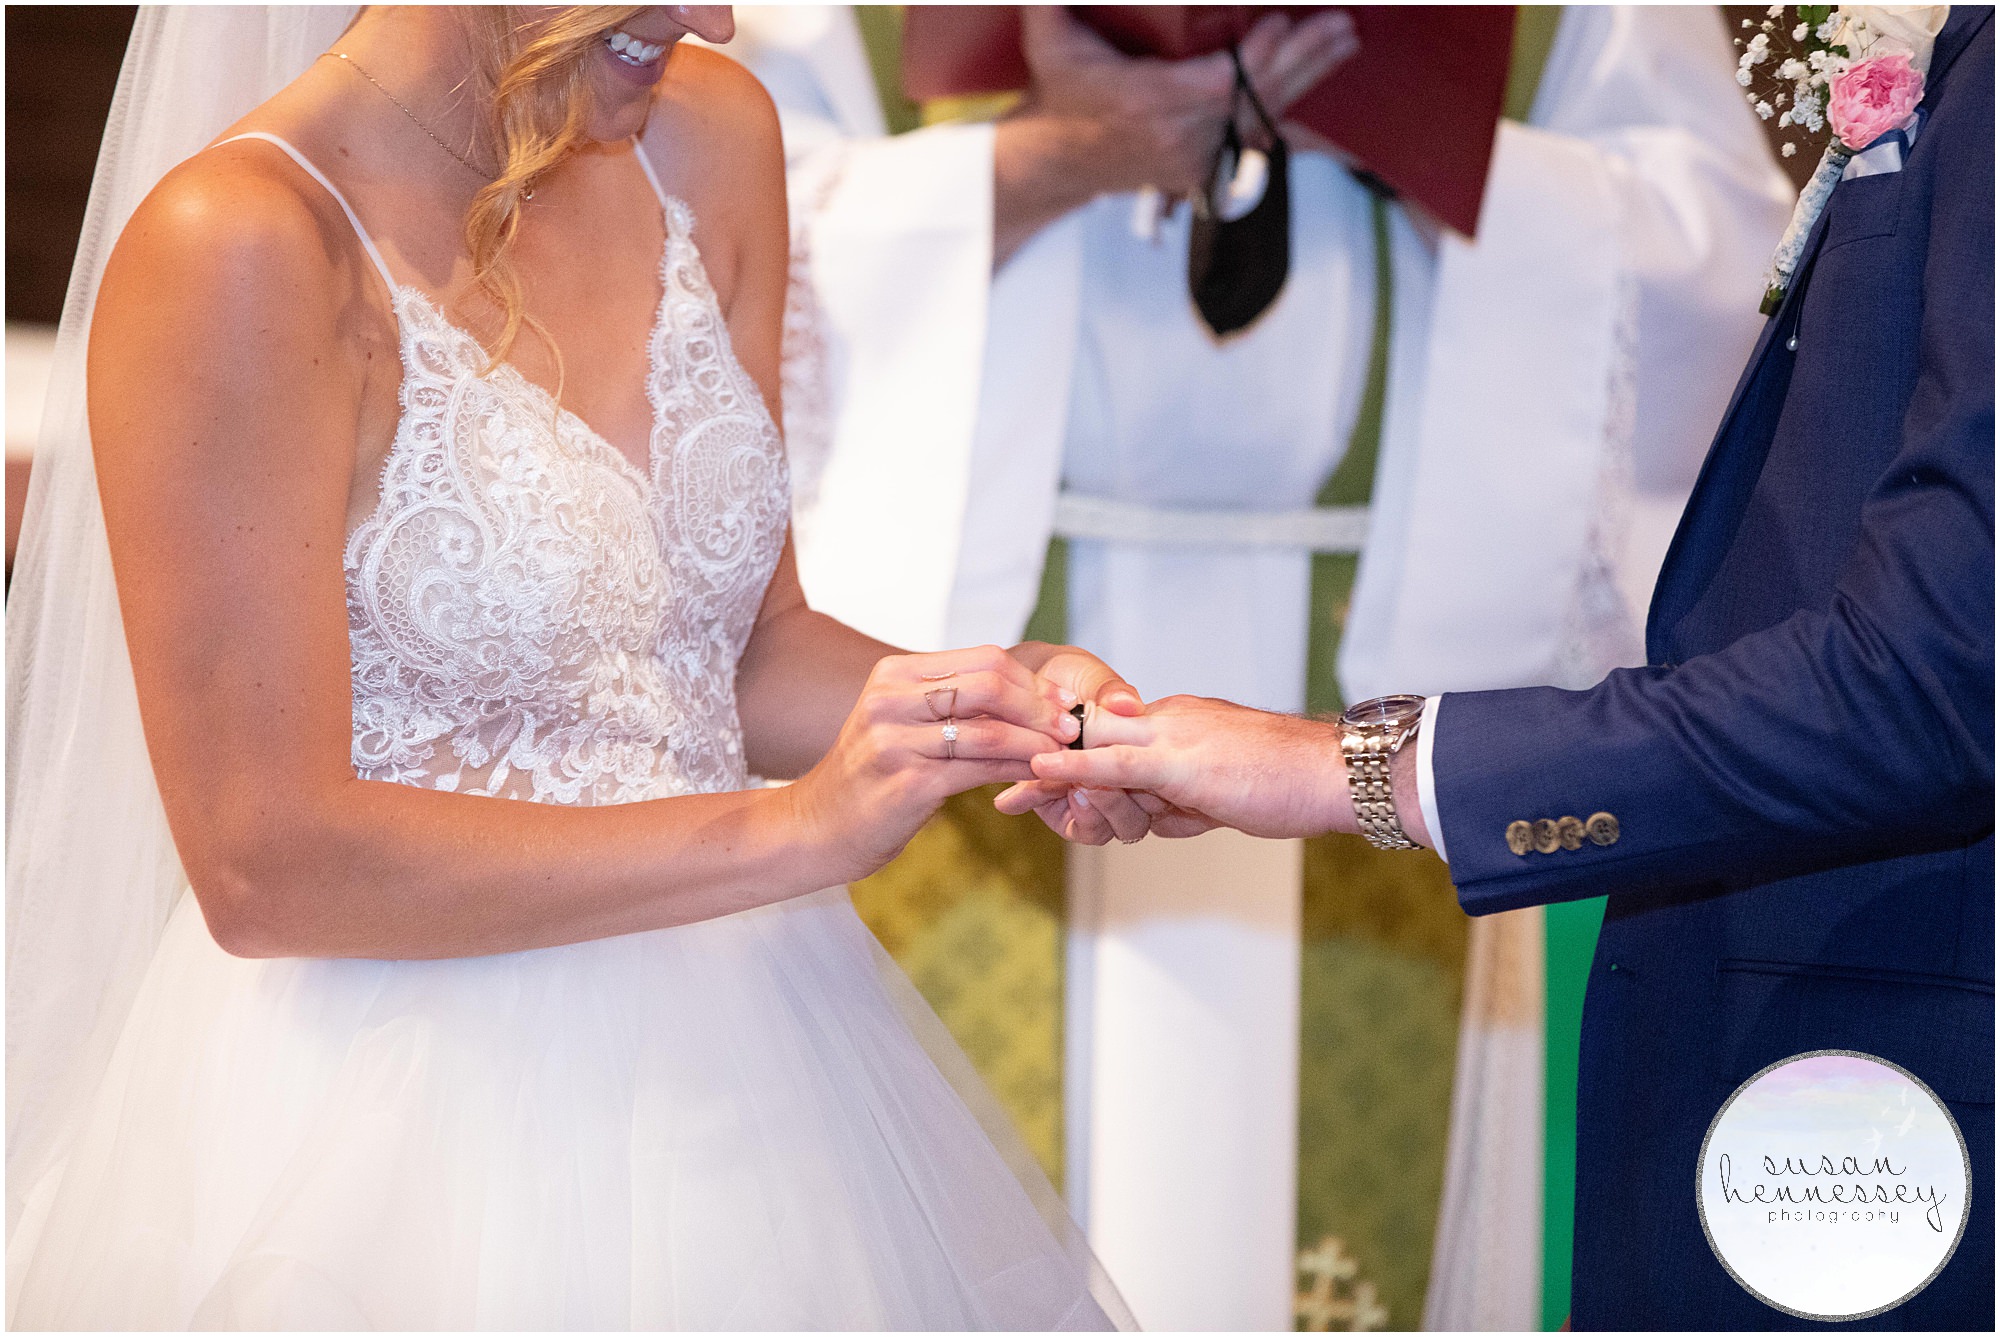 Bride places ring on groom's finger at church ceremony